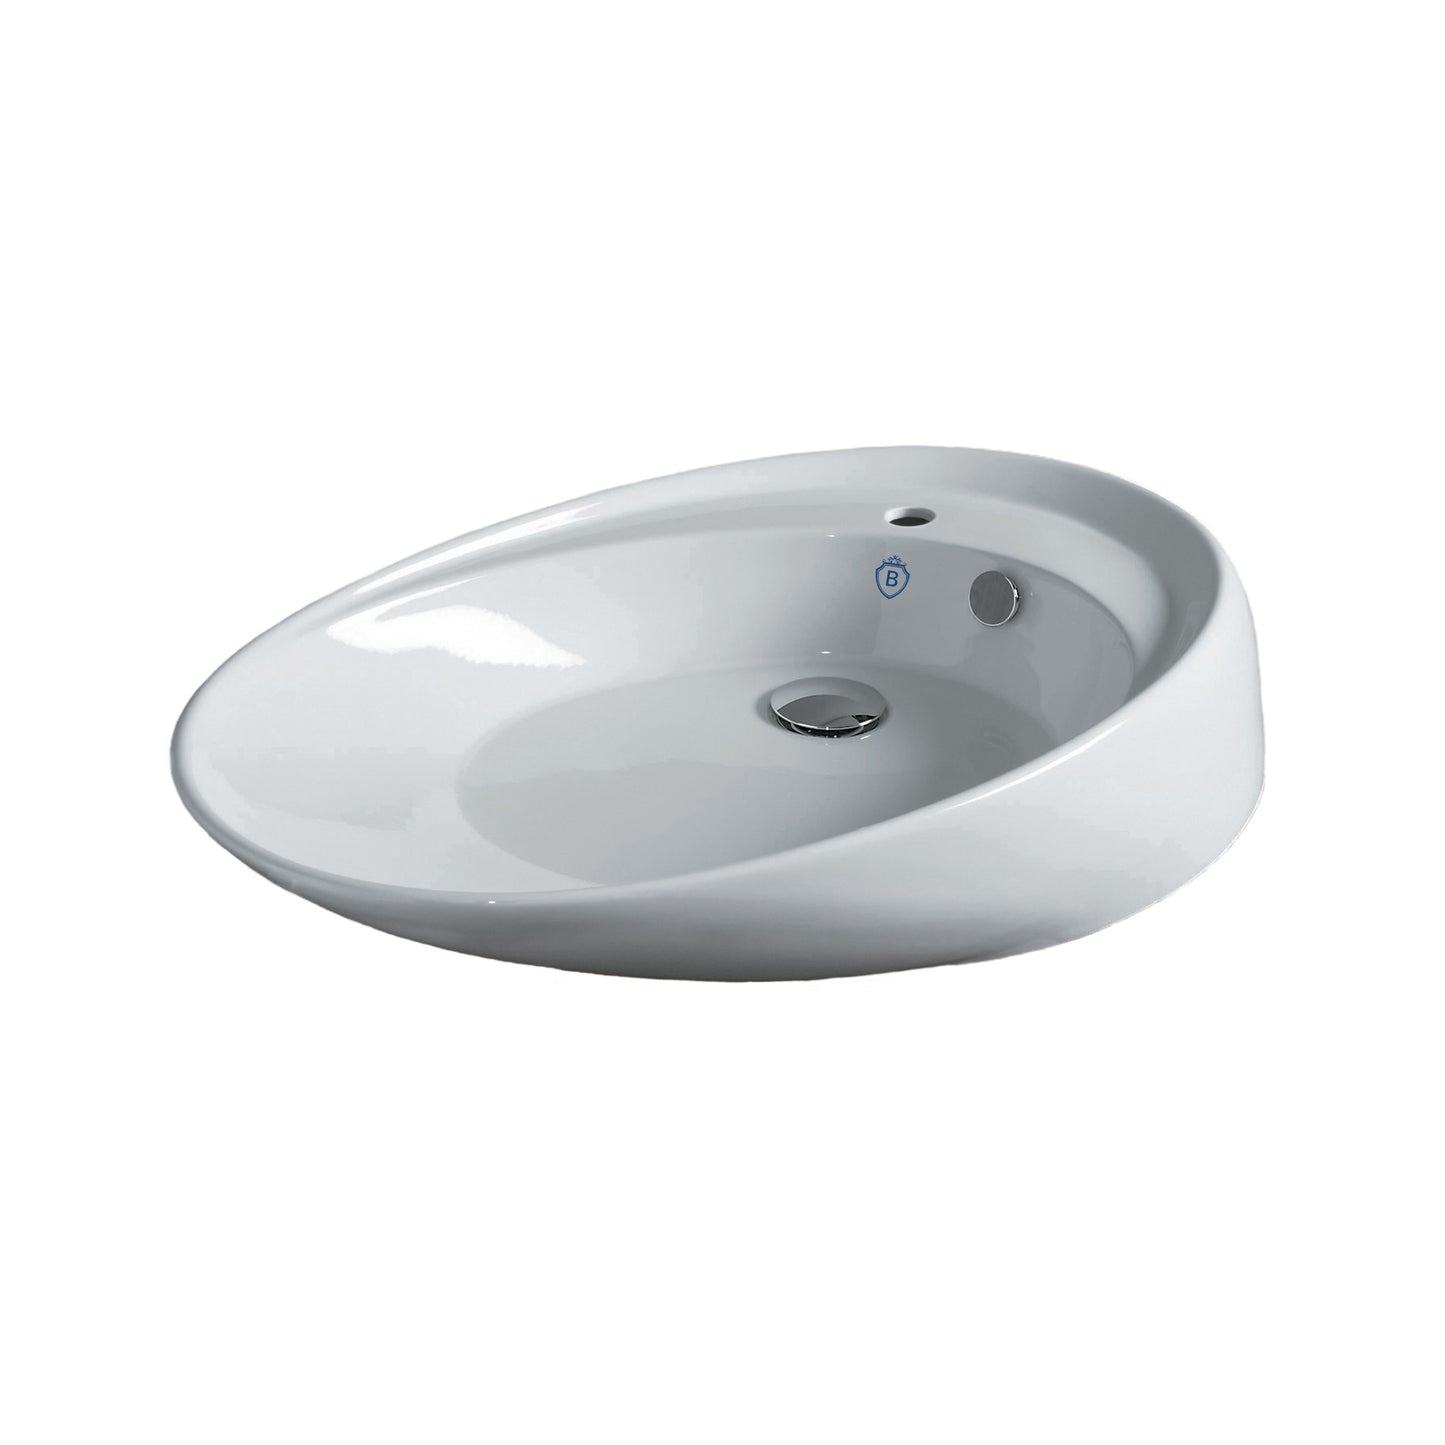 Oval Basin with Single Faucet Hole Drill